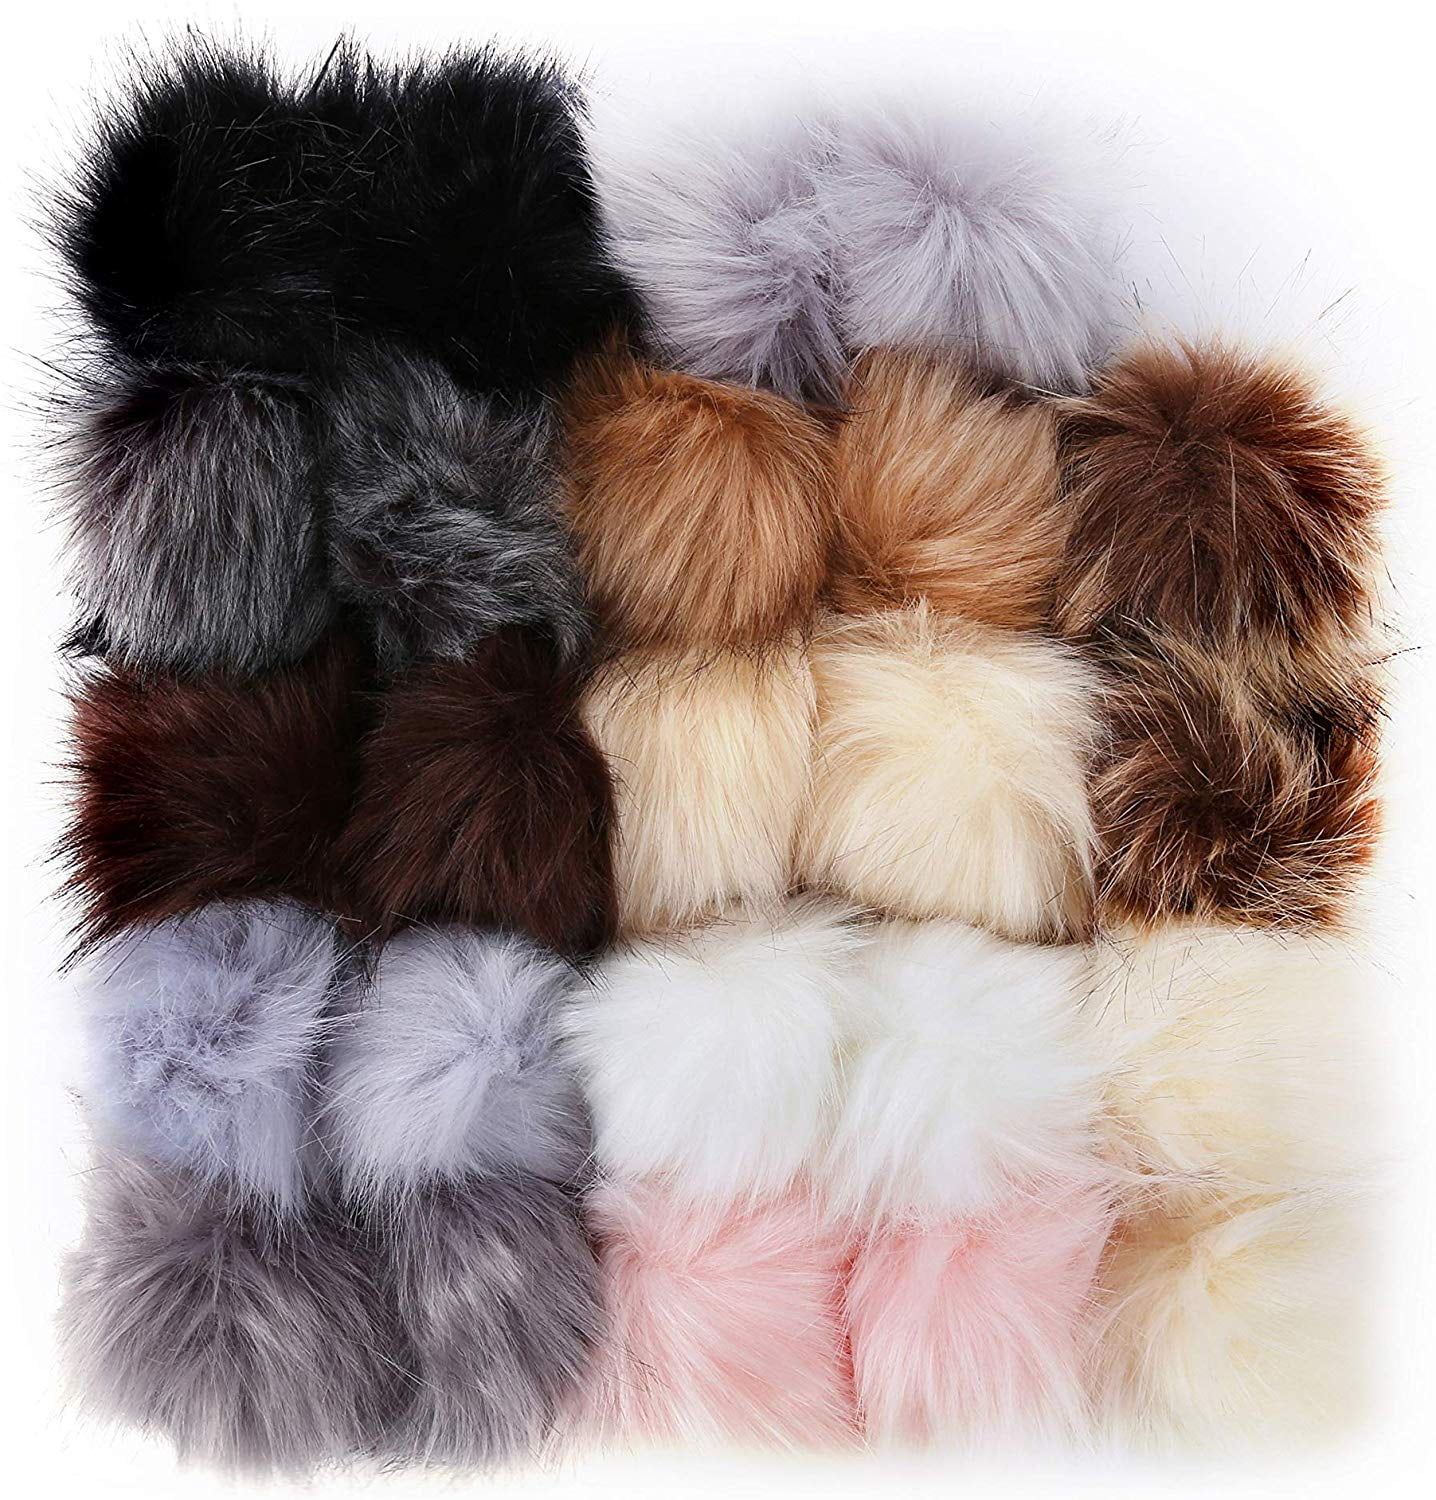 Scarves Bag Charms Multicolor 36Pack Faux Fur Pom Poms Ball Knitting Crafting Accessories for Hat Shoes